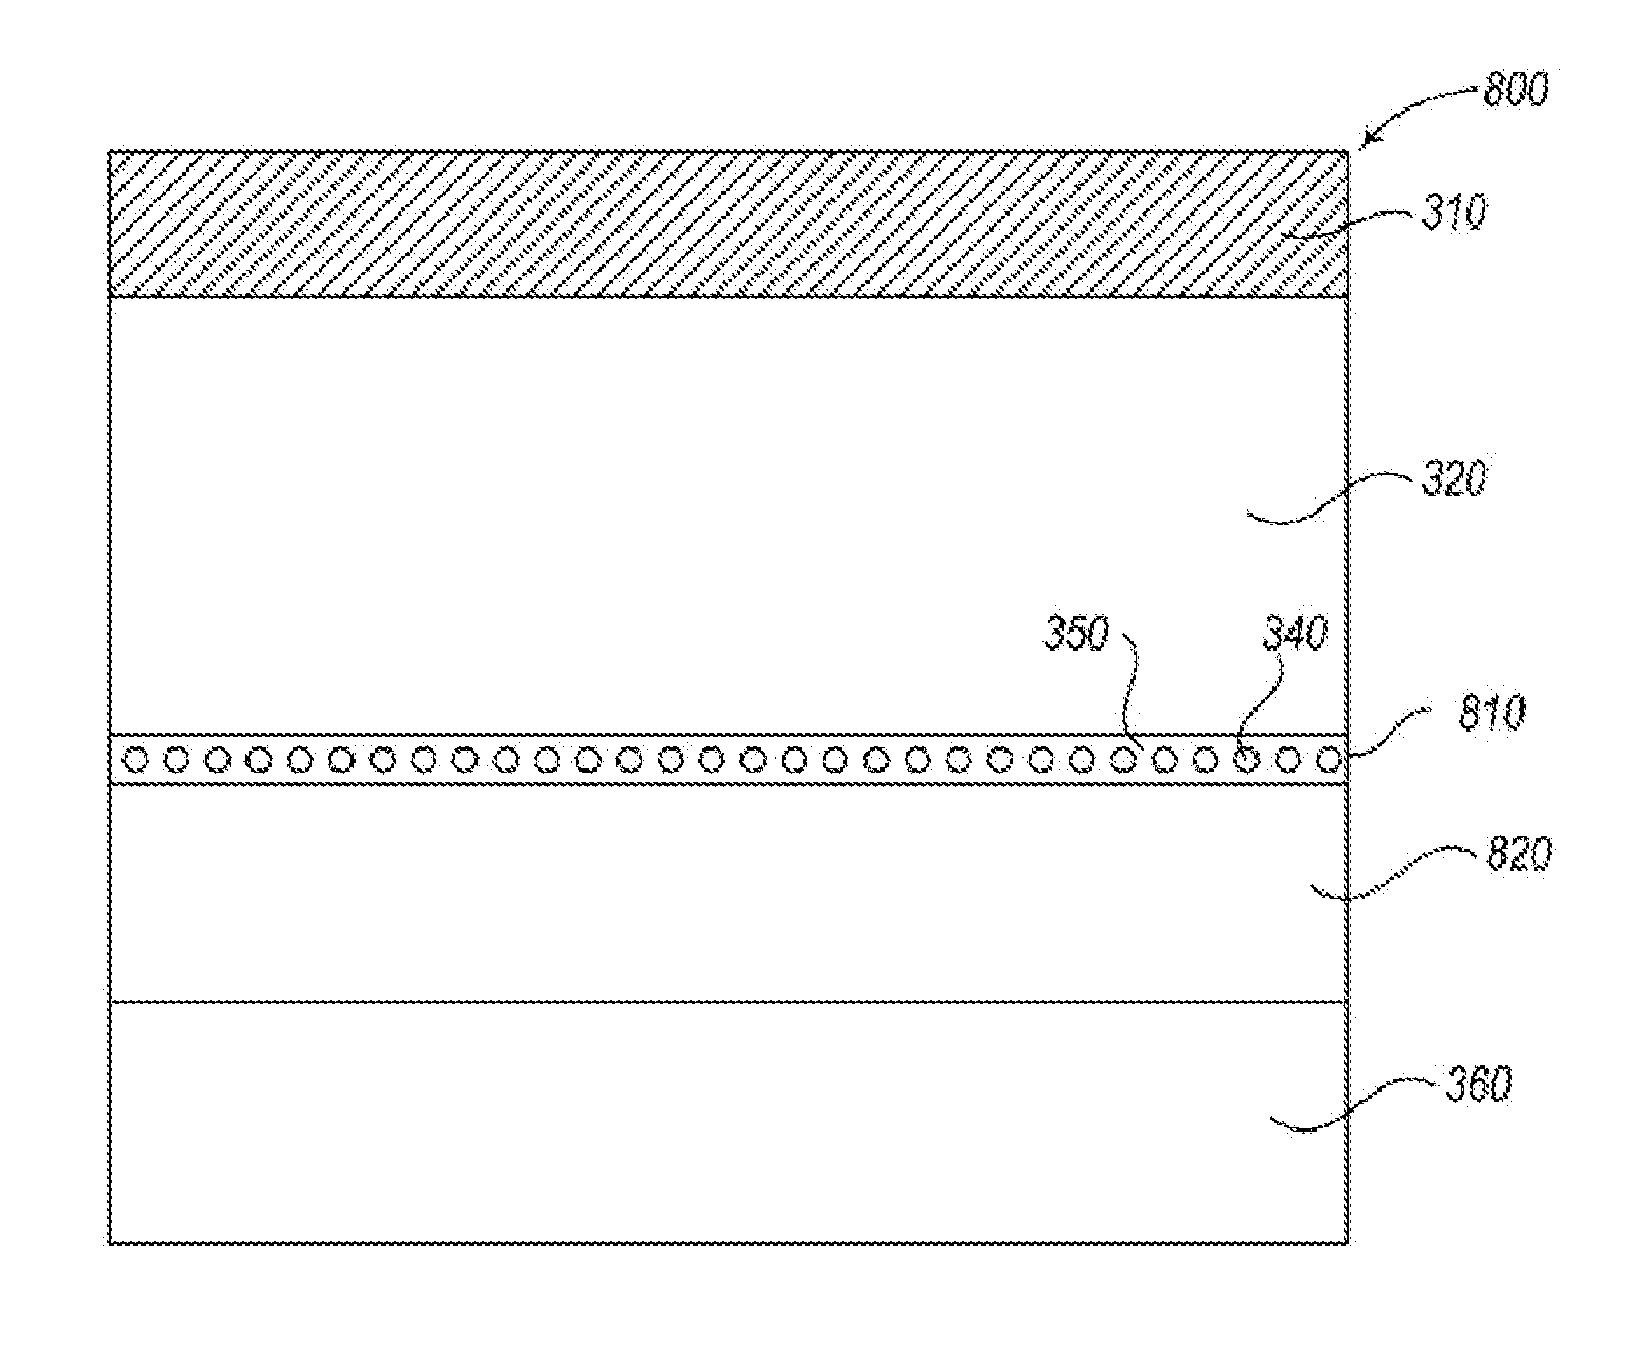 Opto-electrical devices incorporating metal nanowires